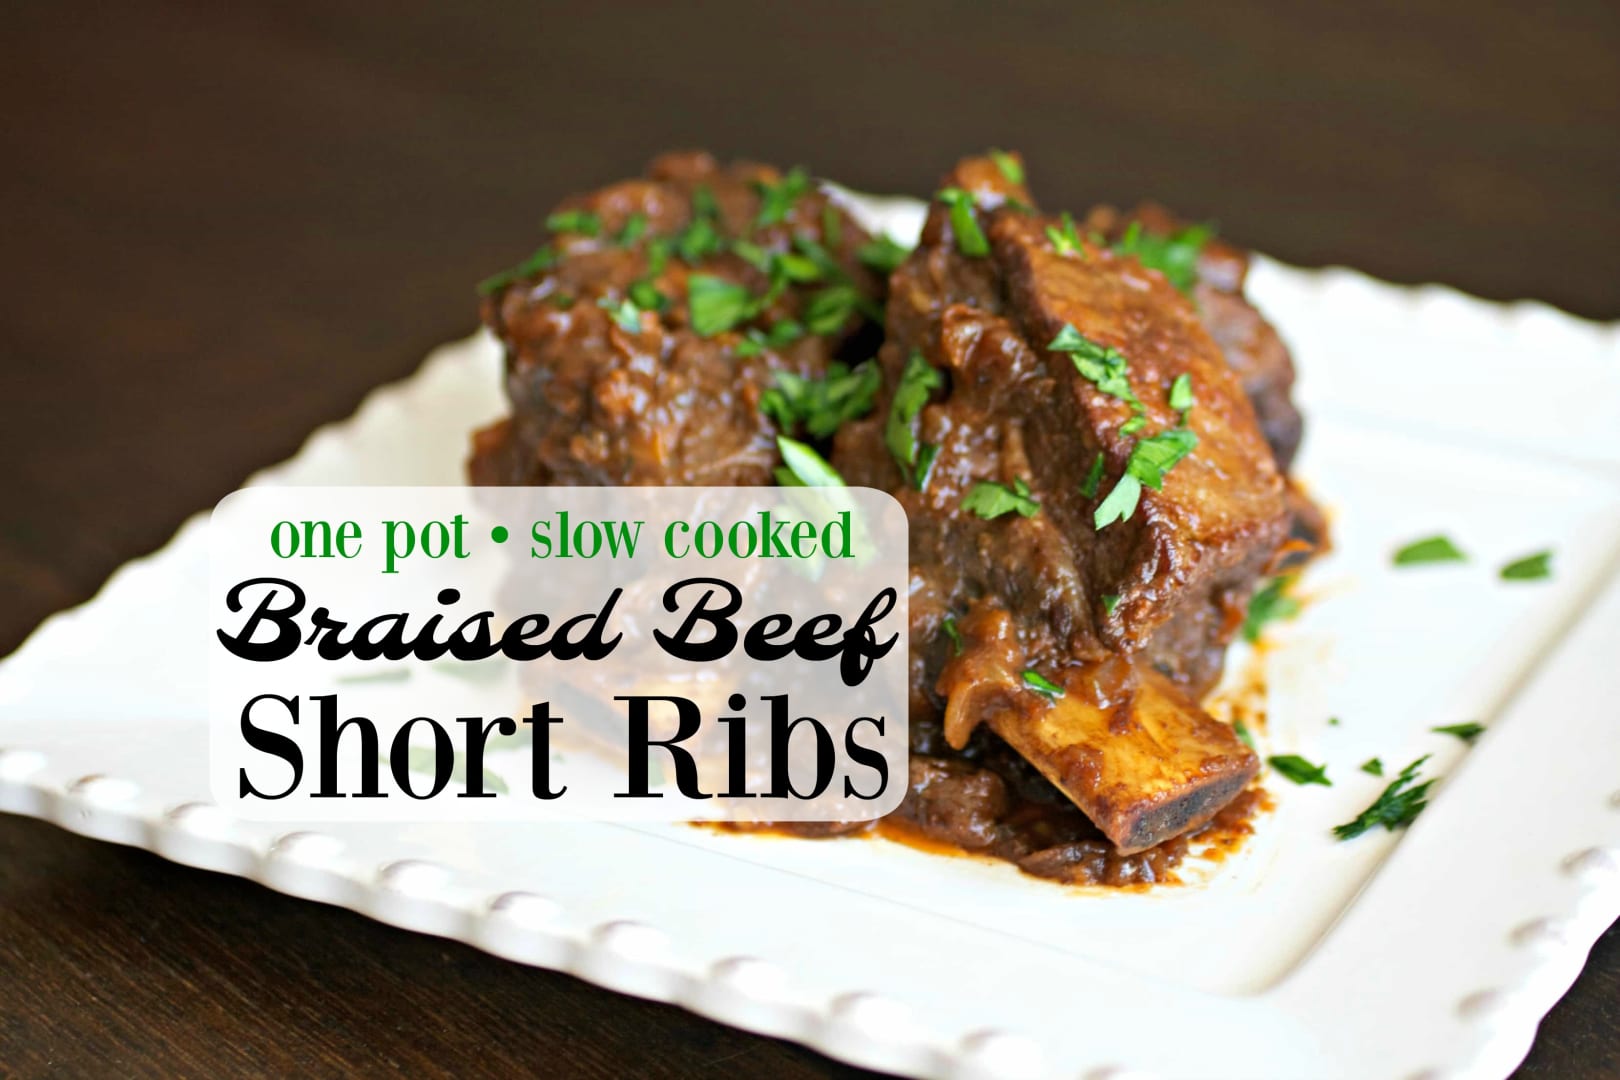 You've gotta try this recipe & if you're in the market for a new skowc, Short Rib Recipe